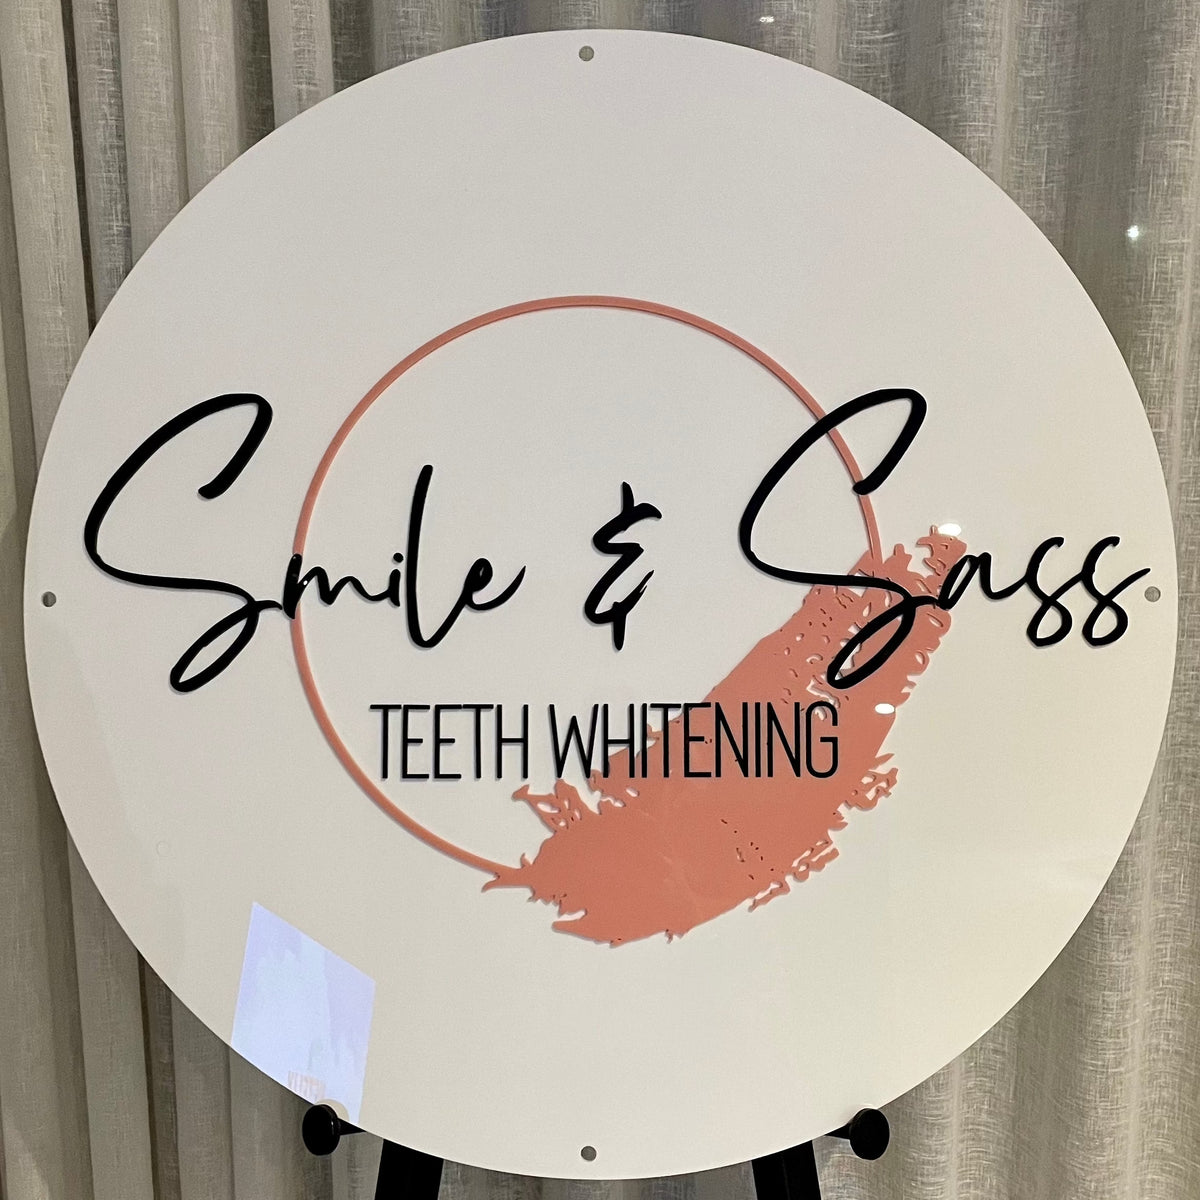 teeth whitening business sign